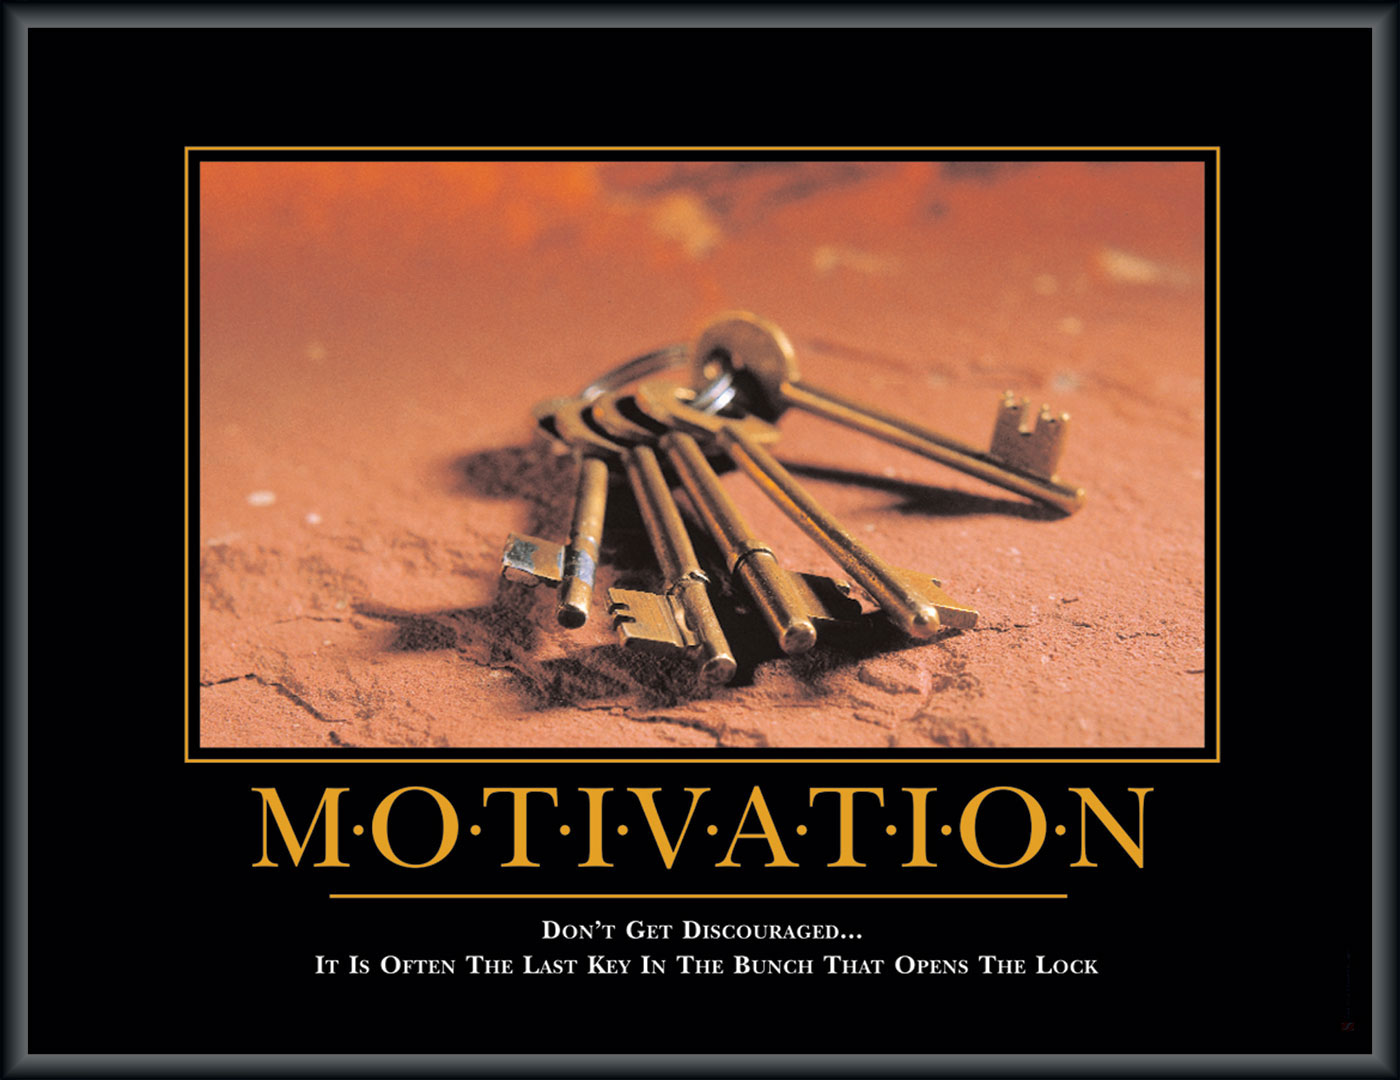 Font used on Motivational Posters? - forum 